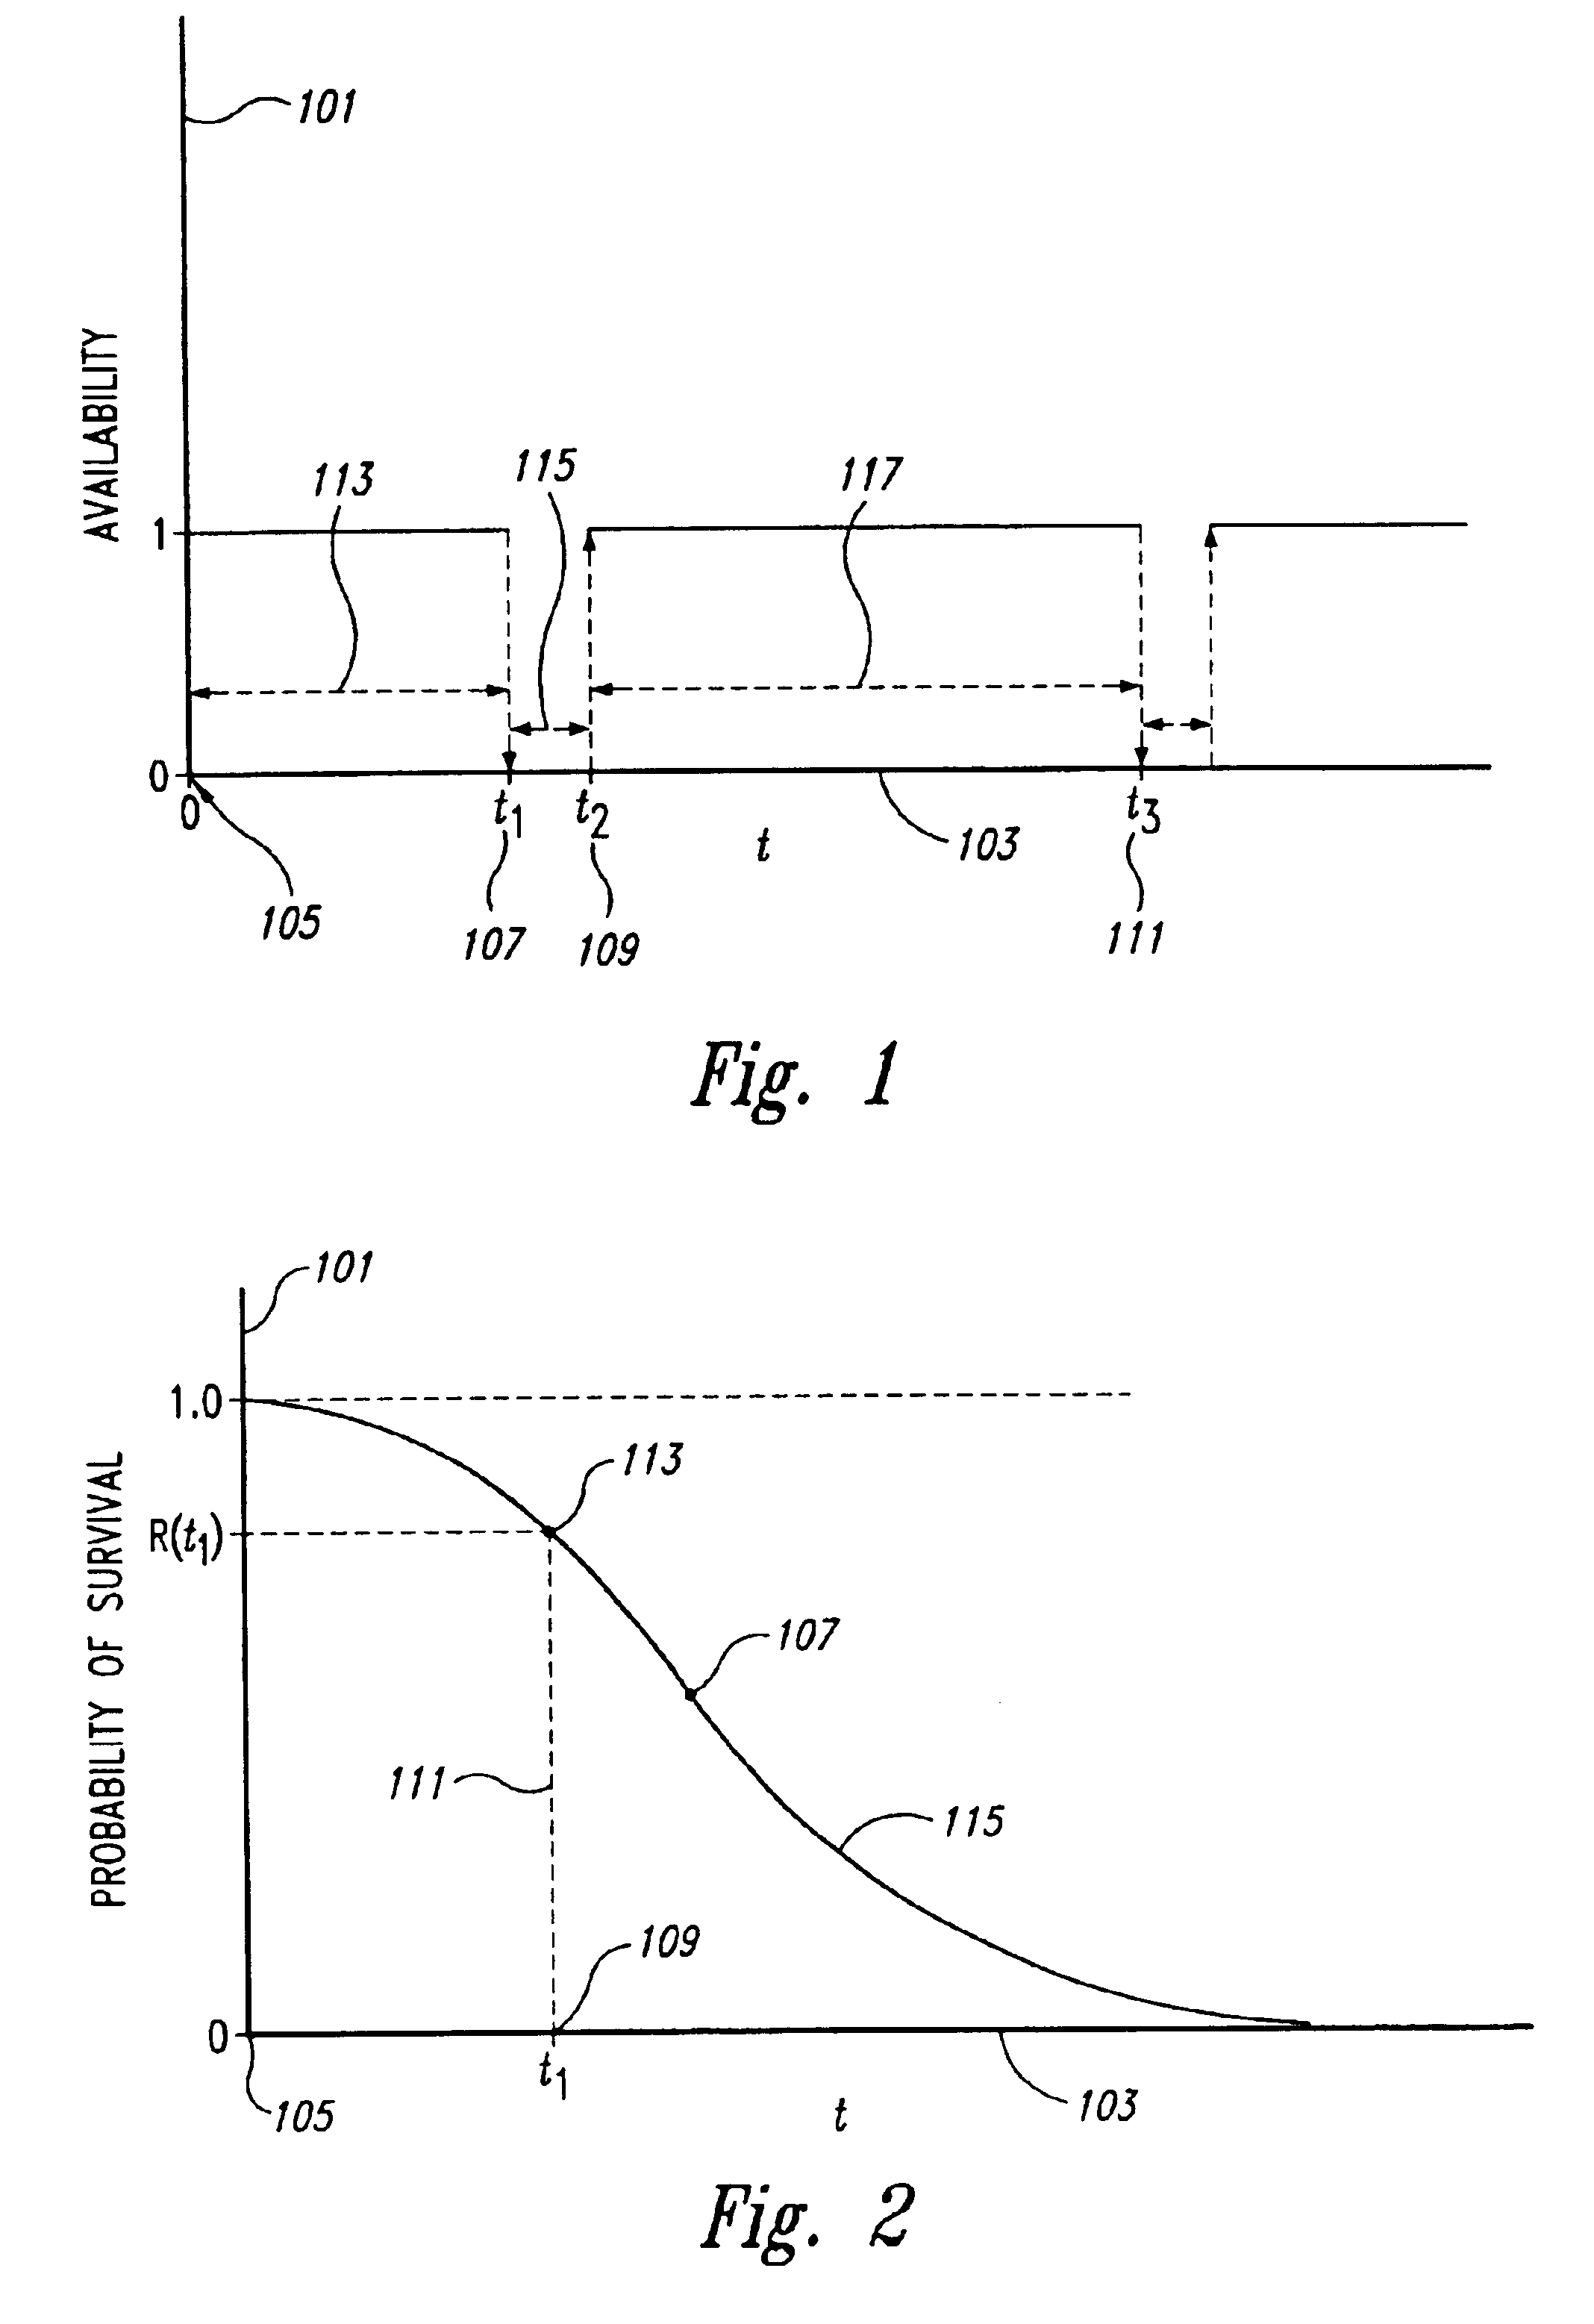 Method and system for assessing availability of complex electronic systems, including computer systems